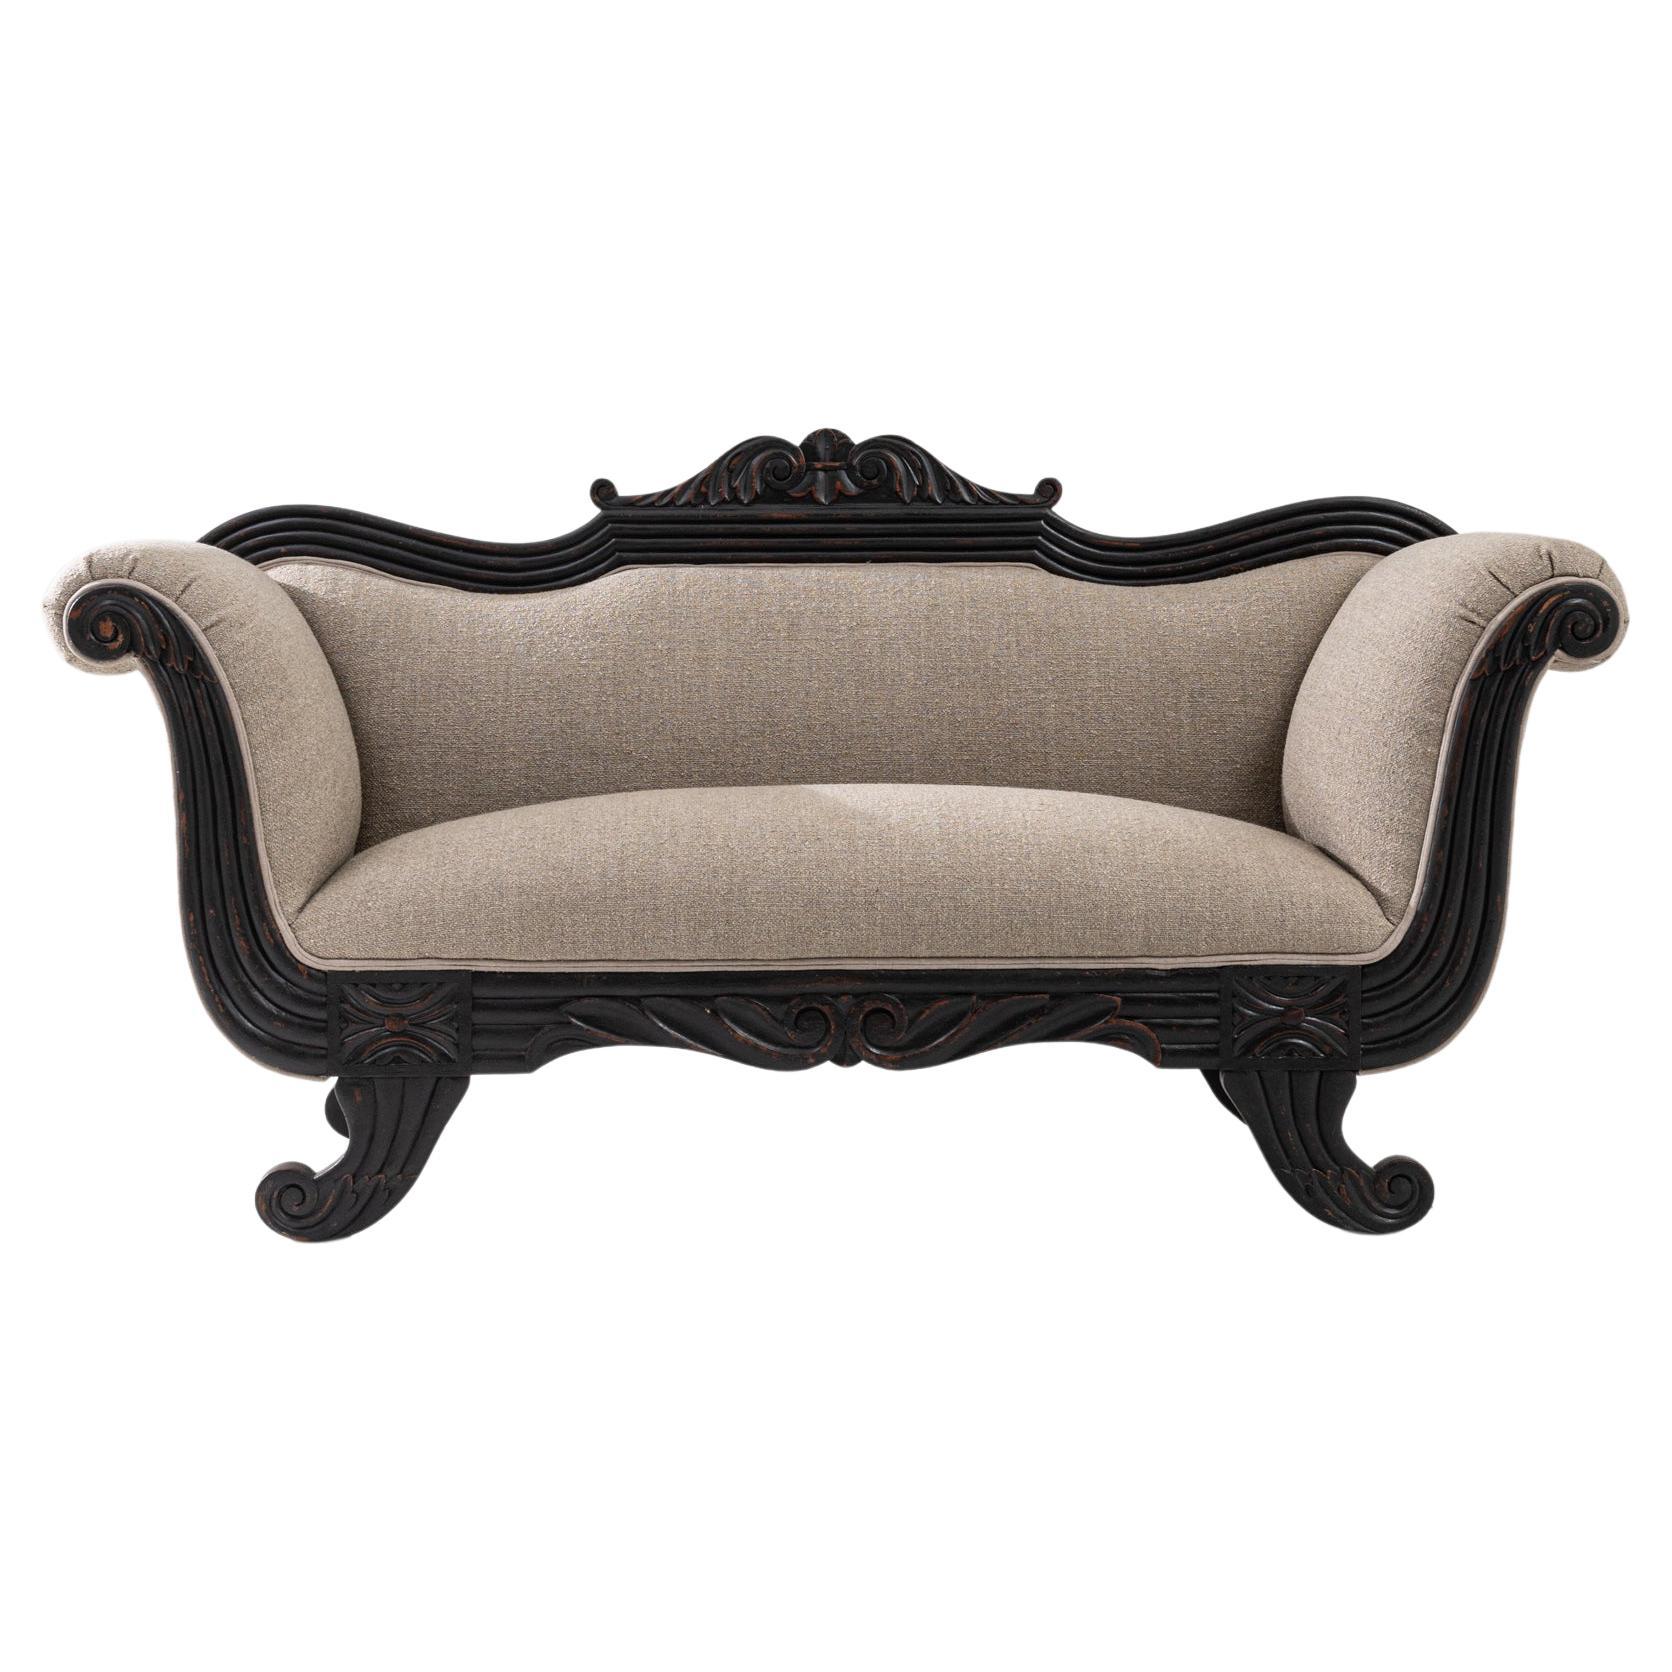 19th Century French Upholstered Sofa